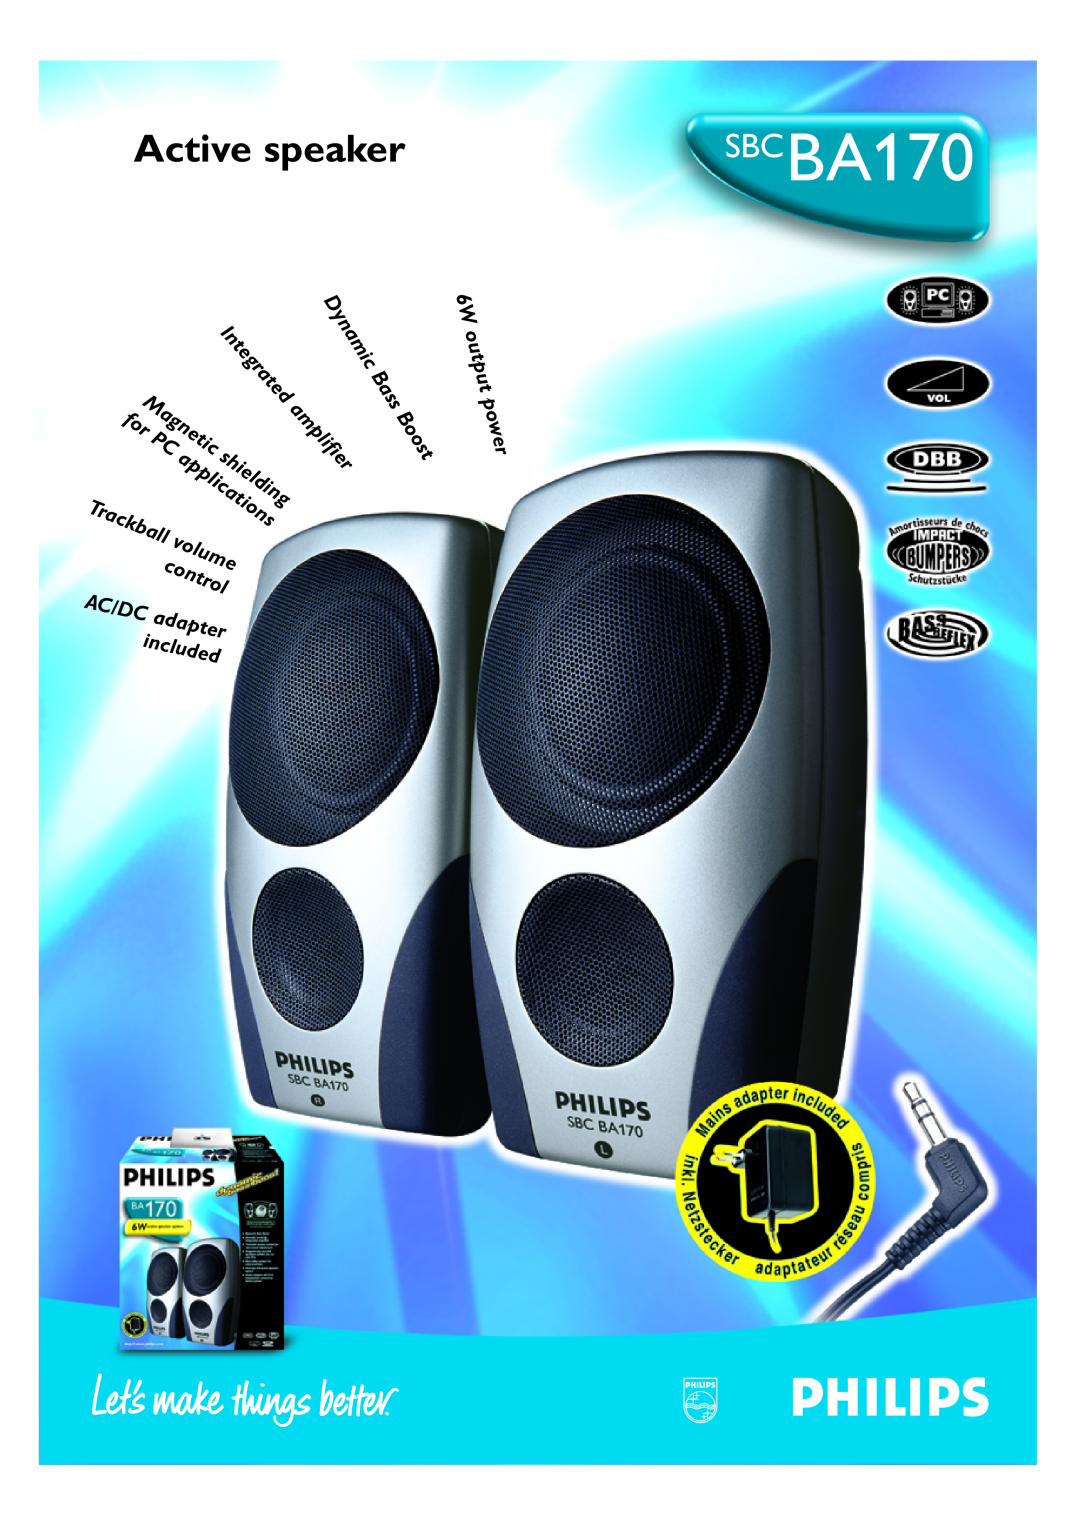 Philips SBCBA170 manual Active speaker, Dynamic, Bass, 6W output power, control, Boost, Ac/Dc, adapter, Integrated, volume 